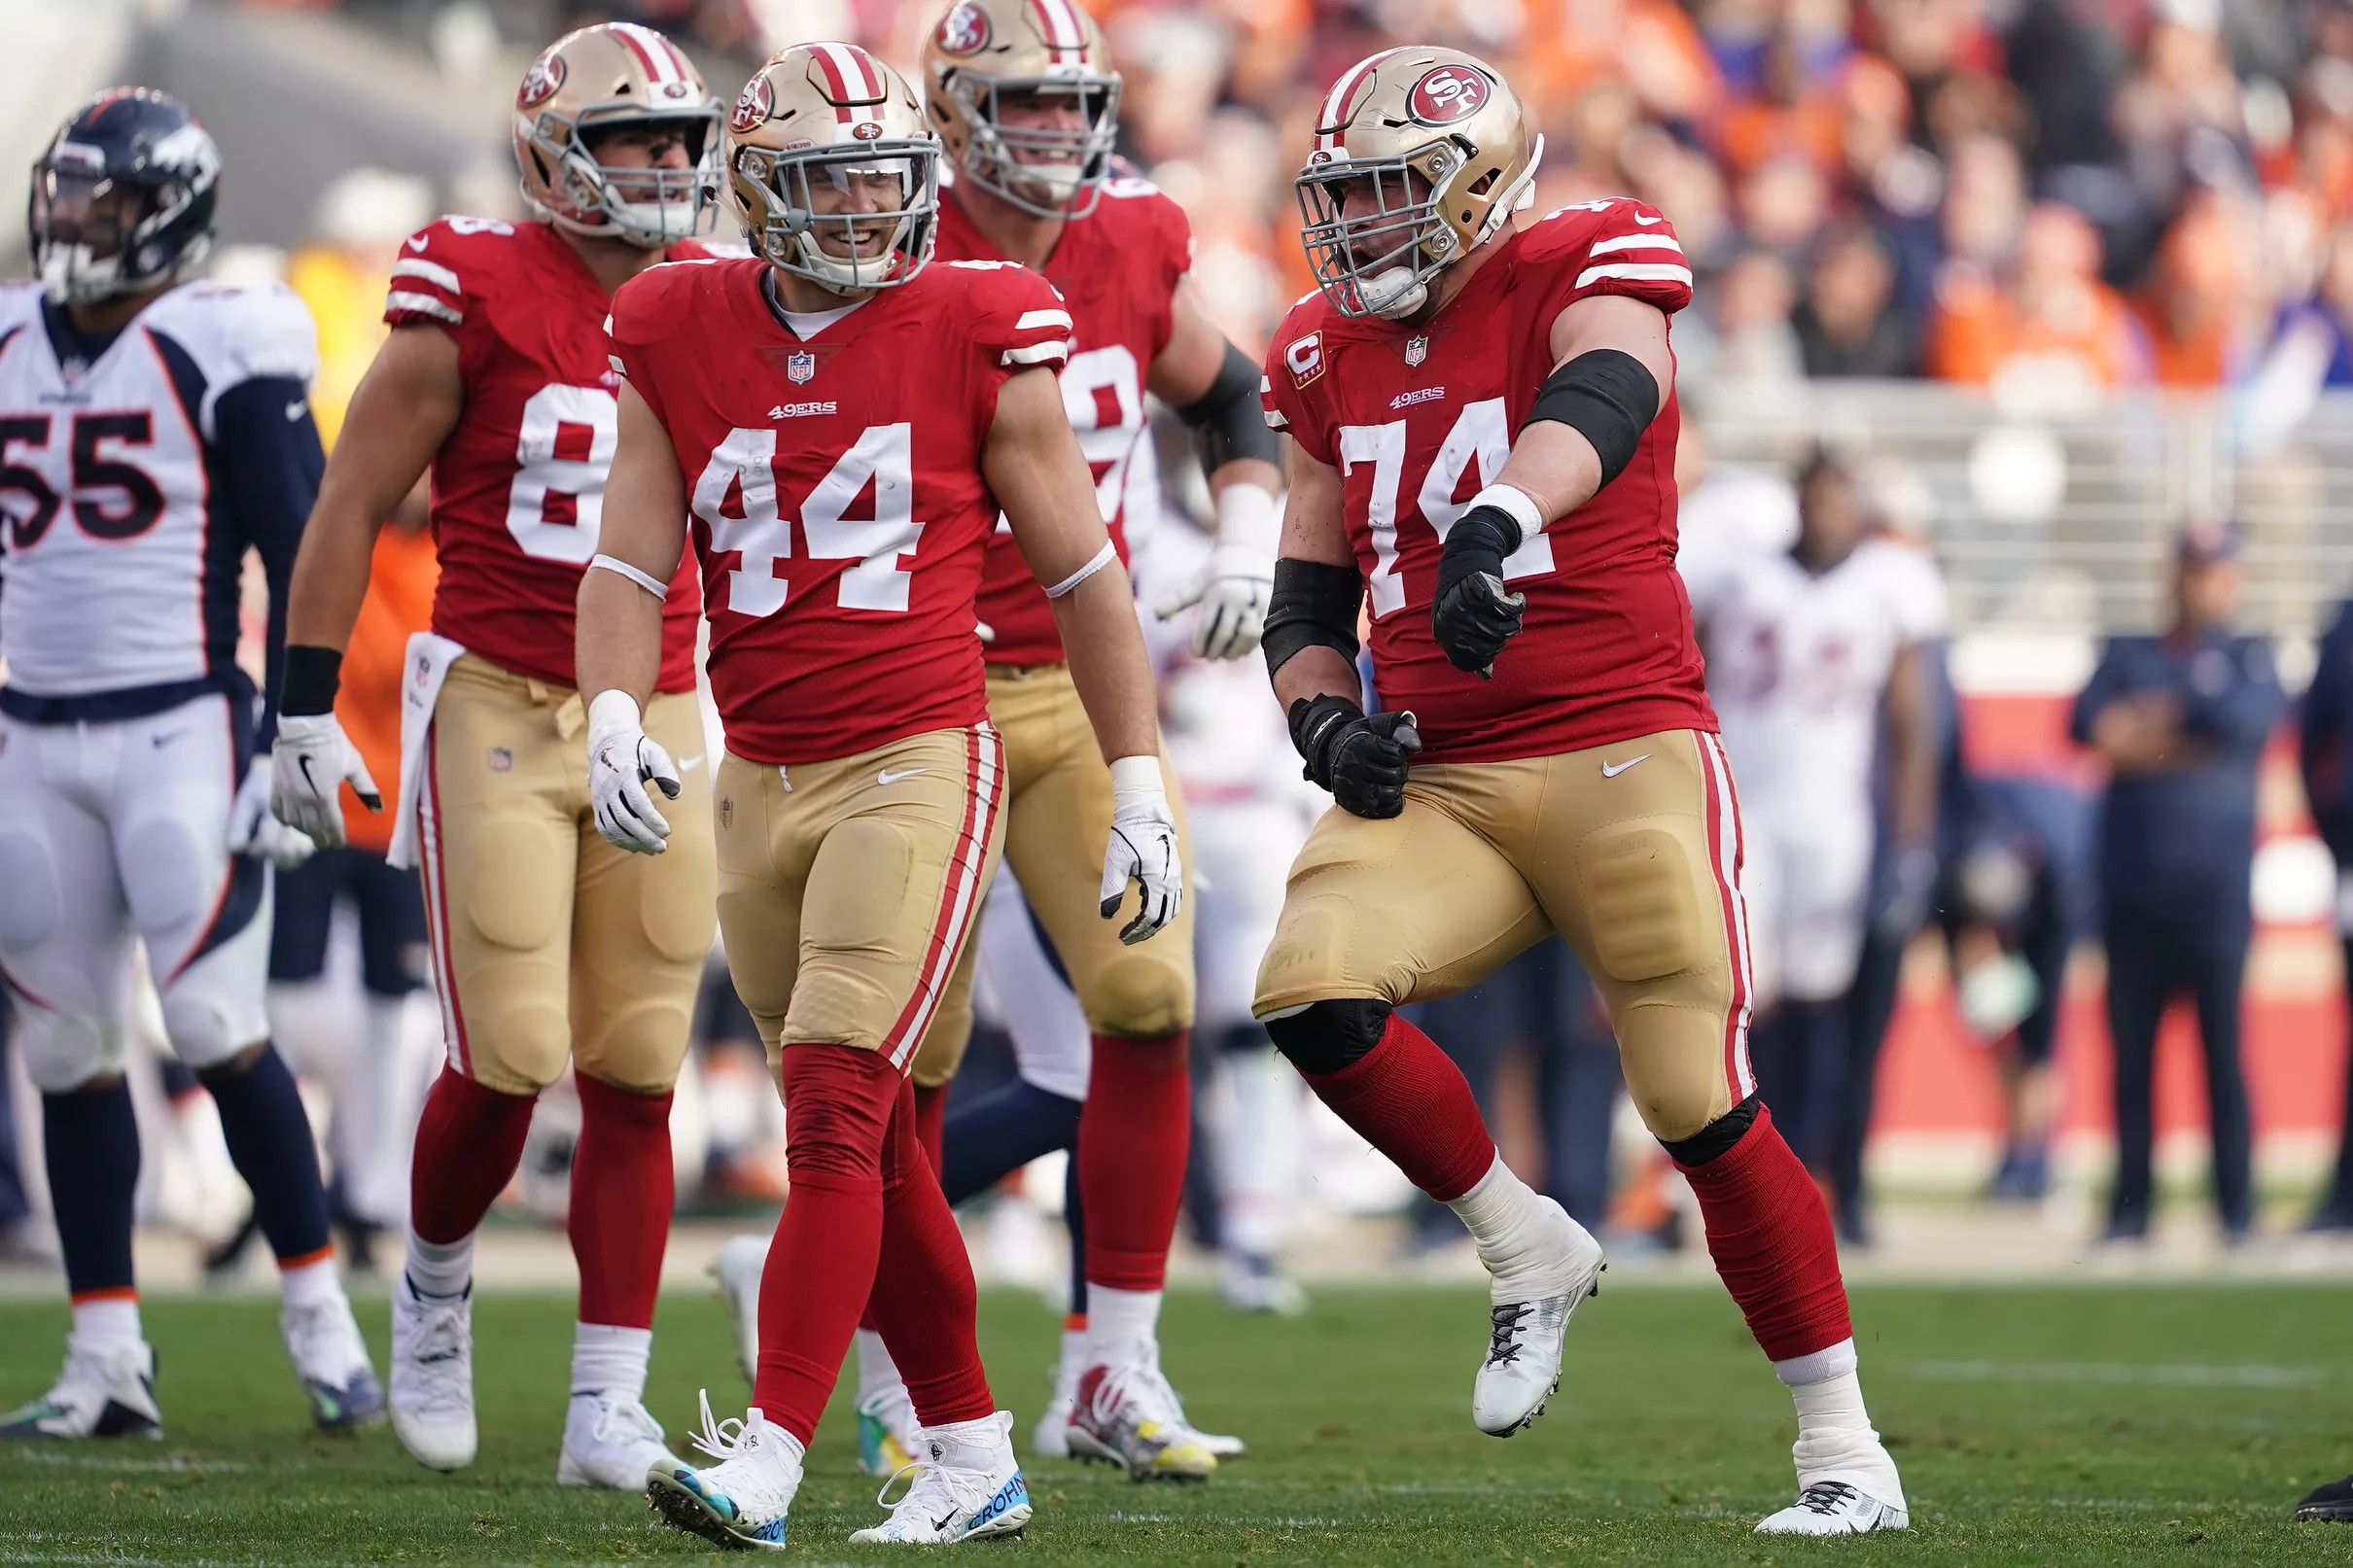 ESPN doesn’t give the 49ers much of a chance to make the playoffs in 2019